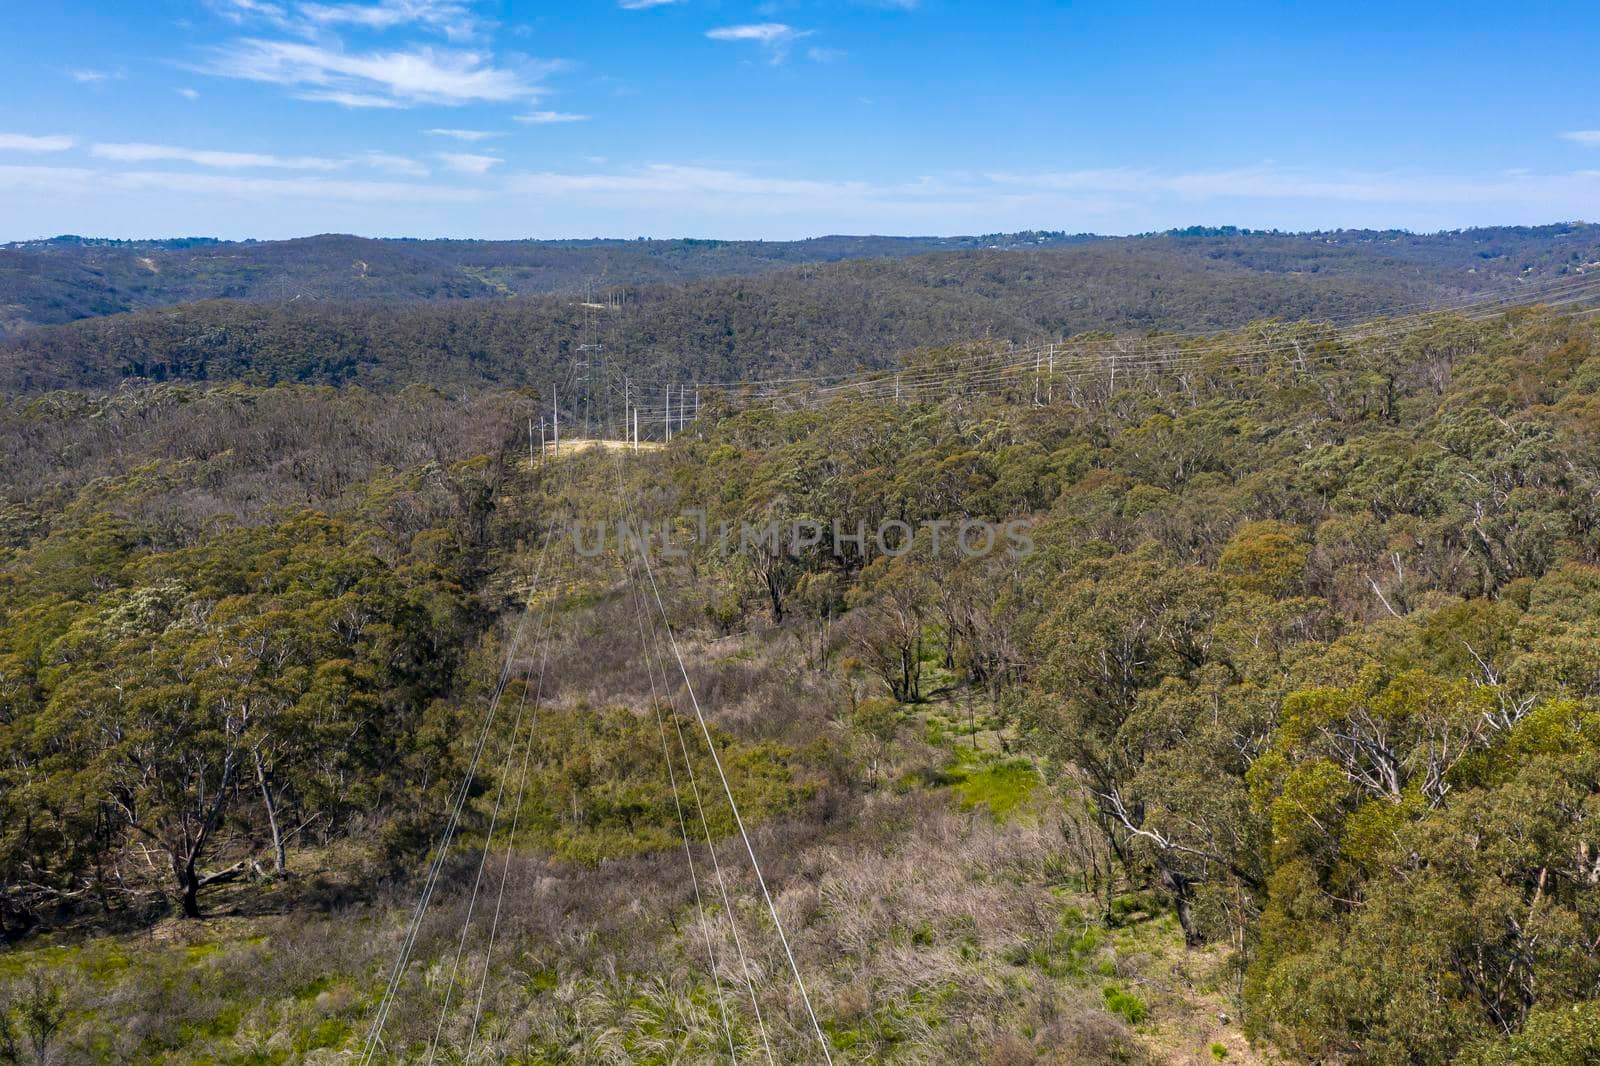 Aerial view of transmission towers and power lines running through a forest in regional Australia